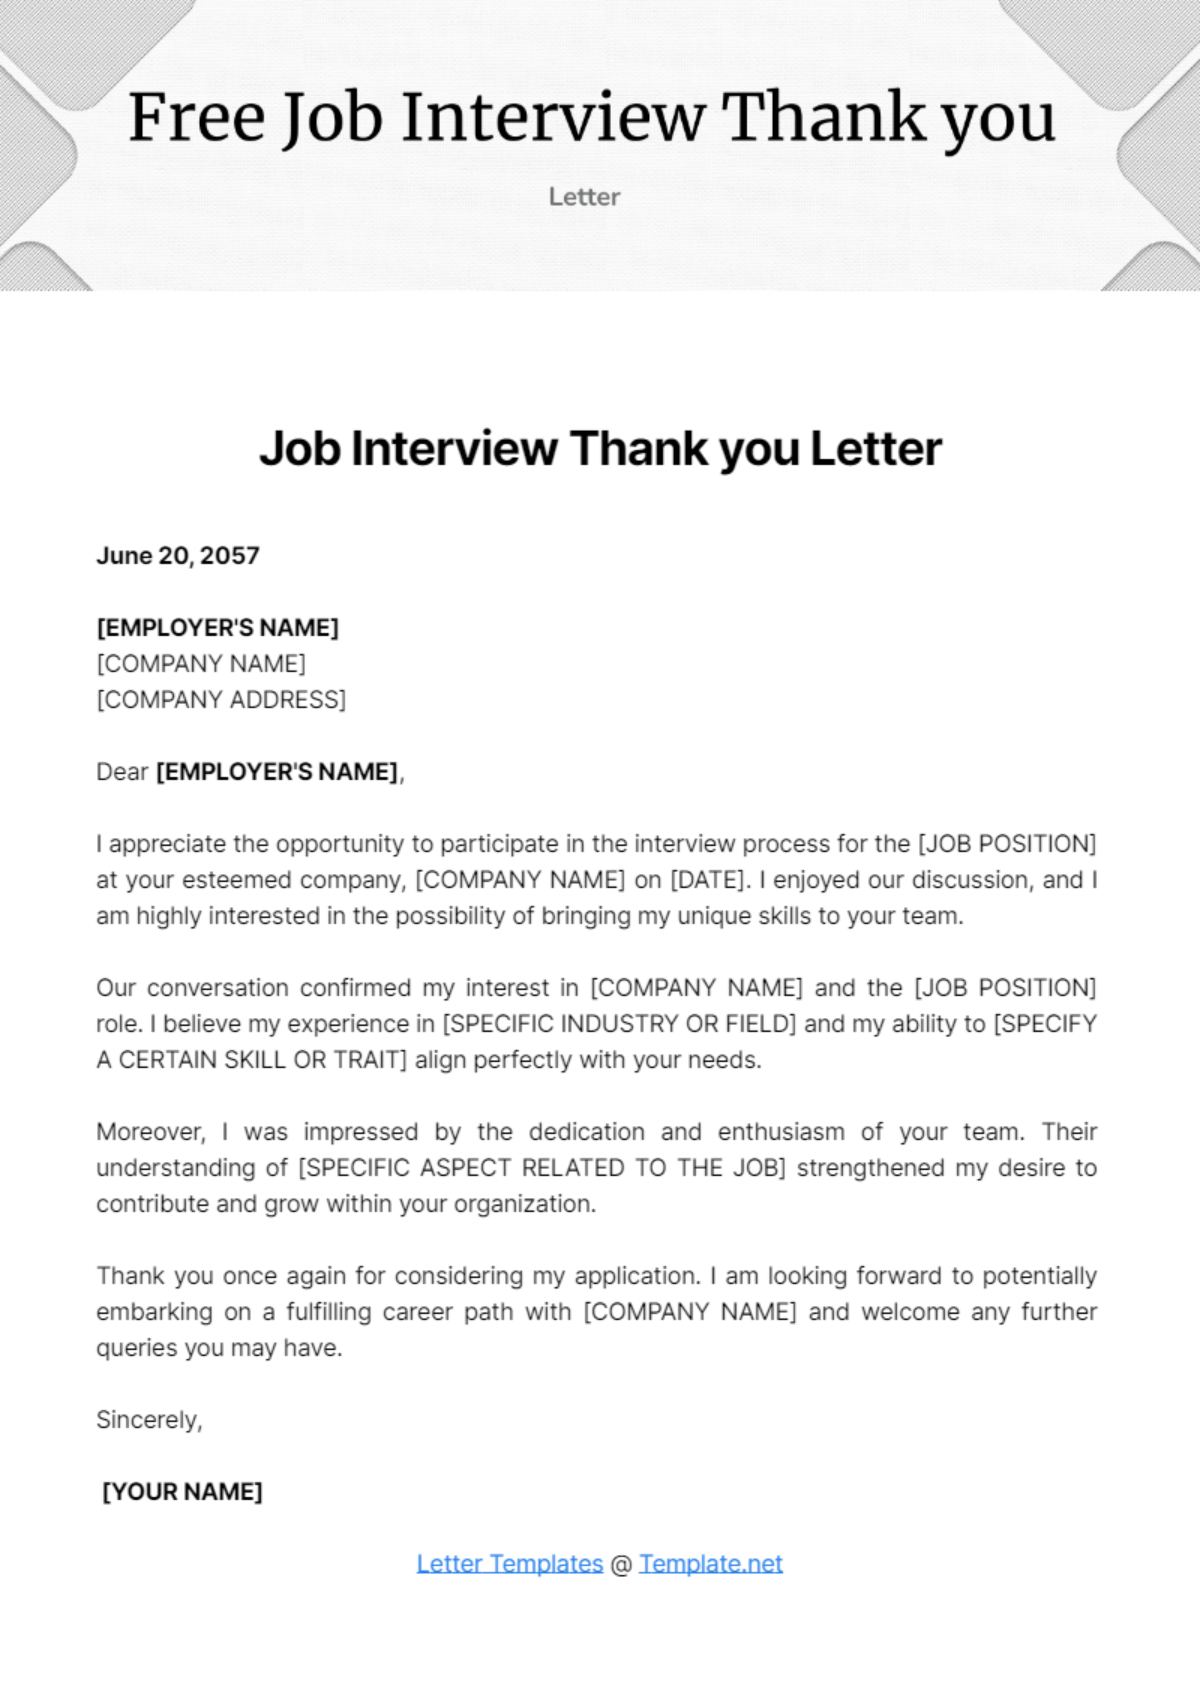 Job Interview Thank you Letter Template